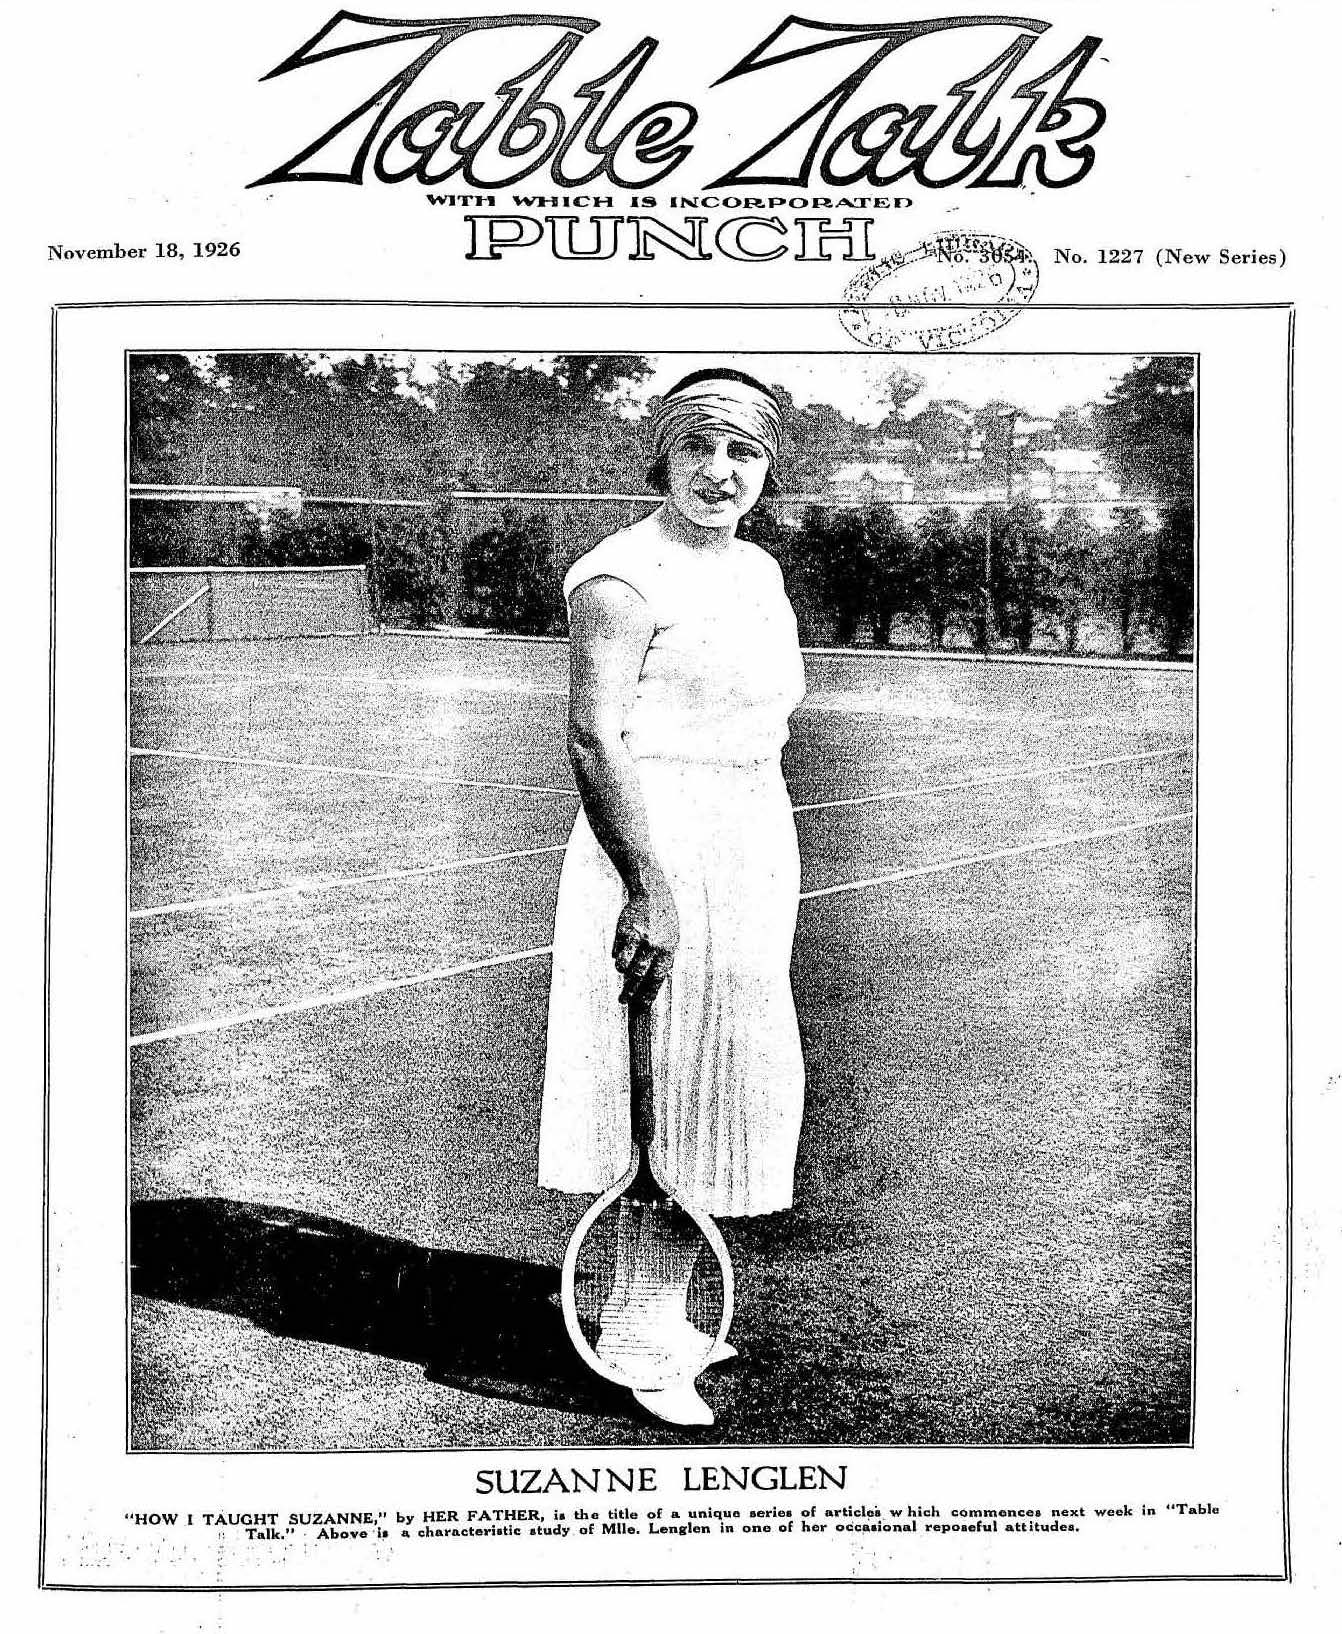 Suzanne Lenglen holding a tennis racket and standing on a court, on the cover of Table Talk